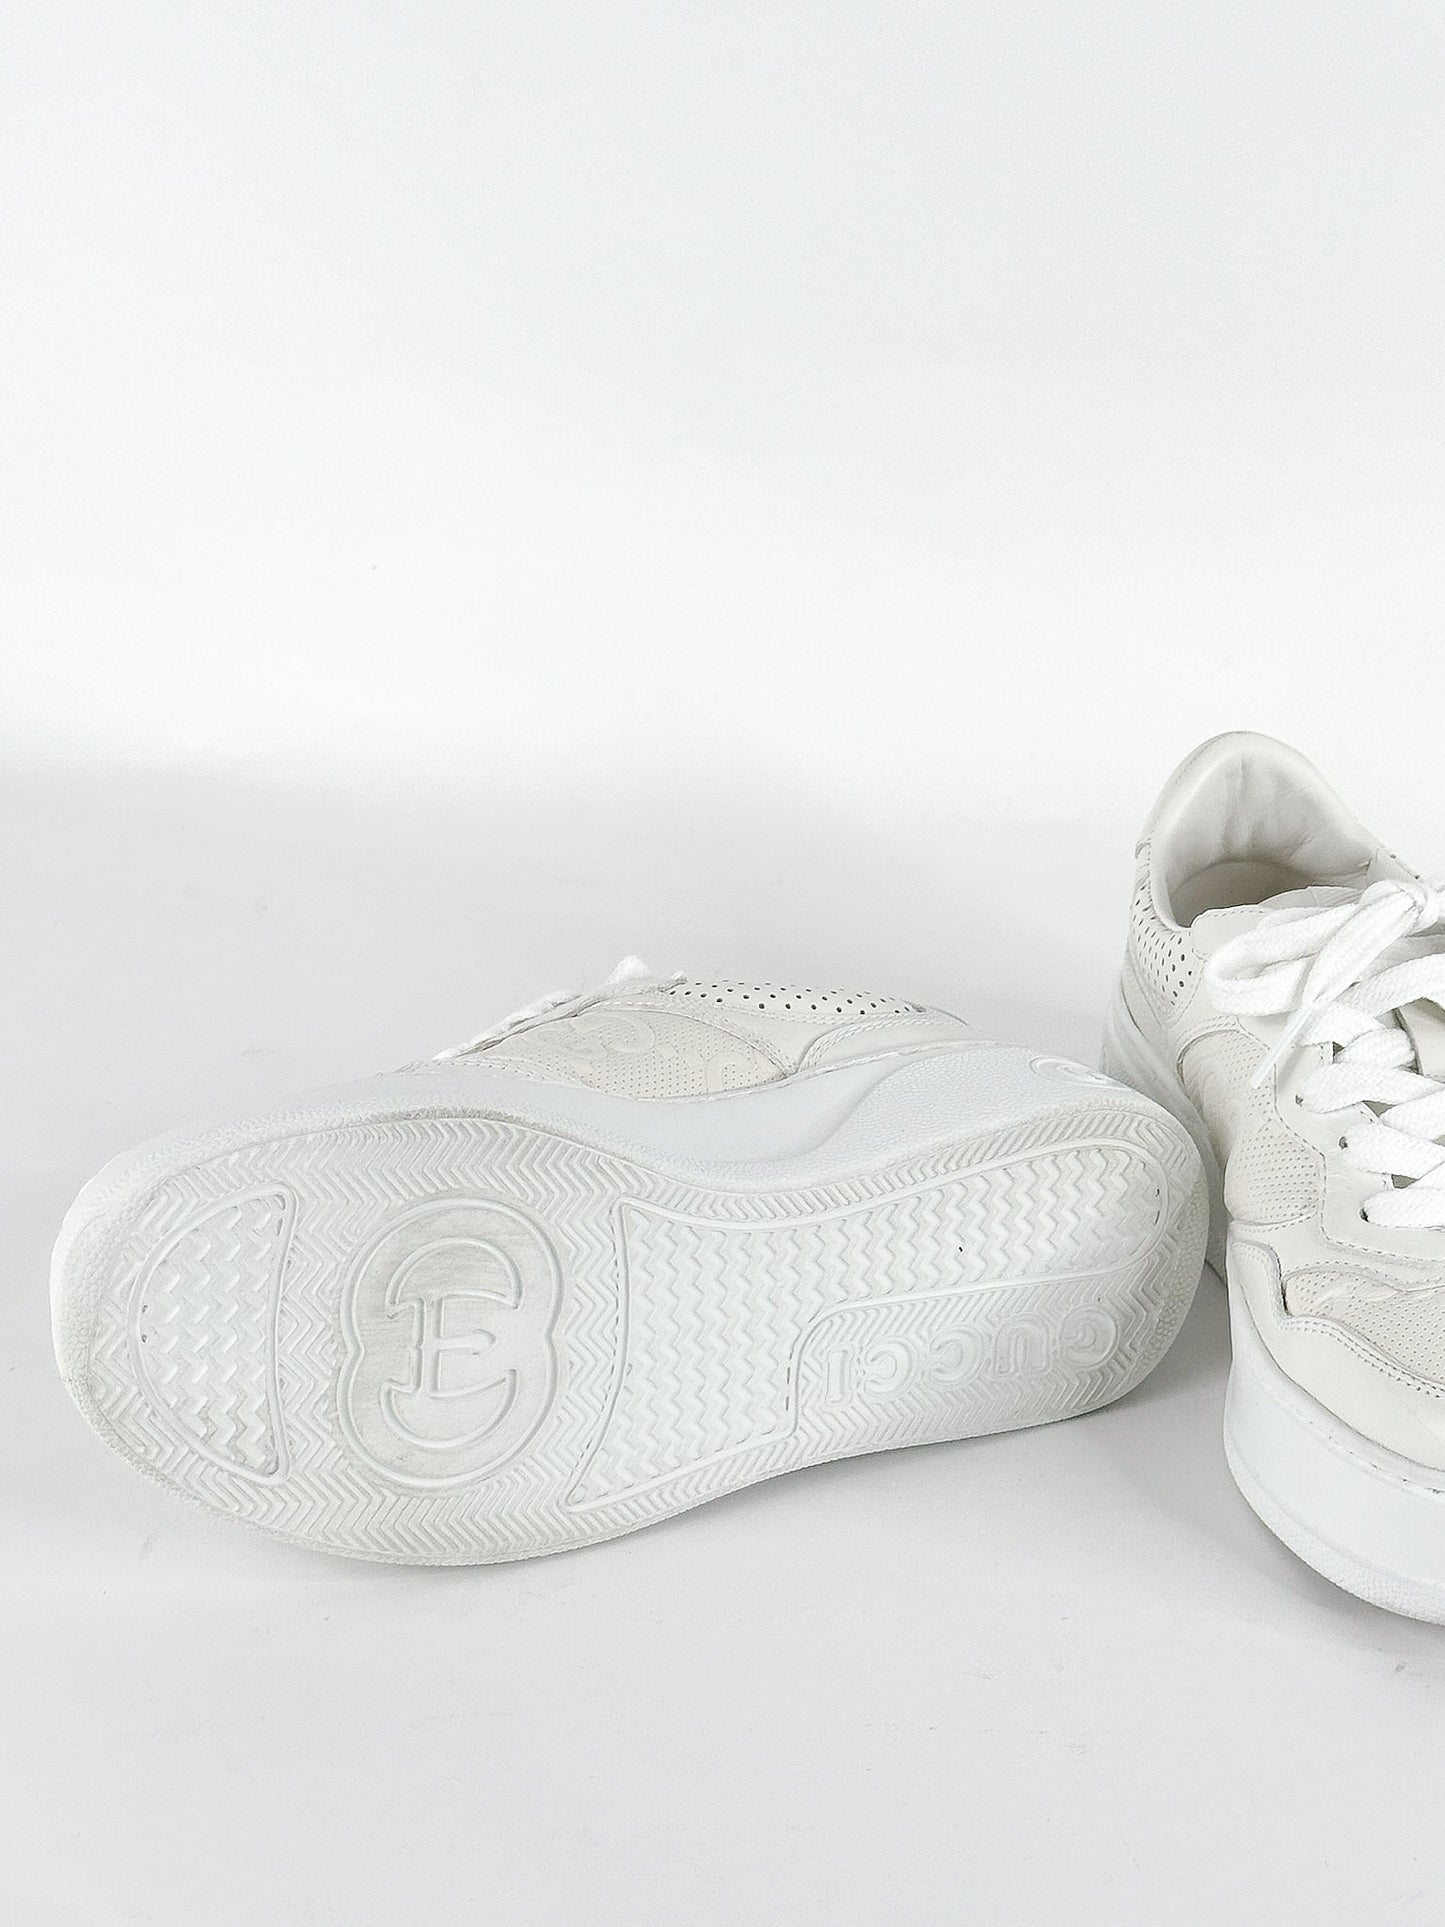 Gucci White Leather GG Embossed
Perforated Leather Trainers Sneakers
Size 35